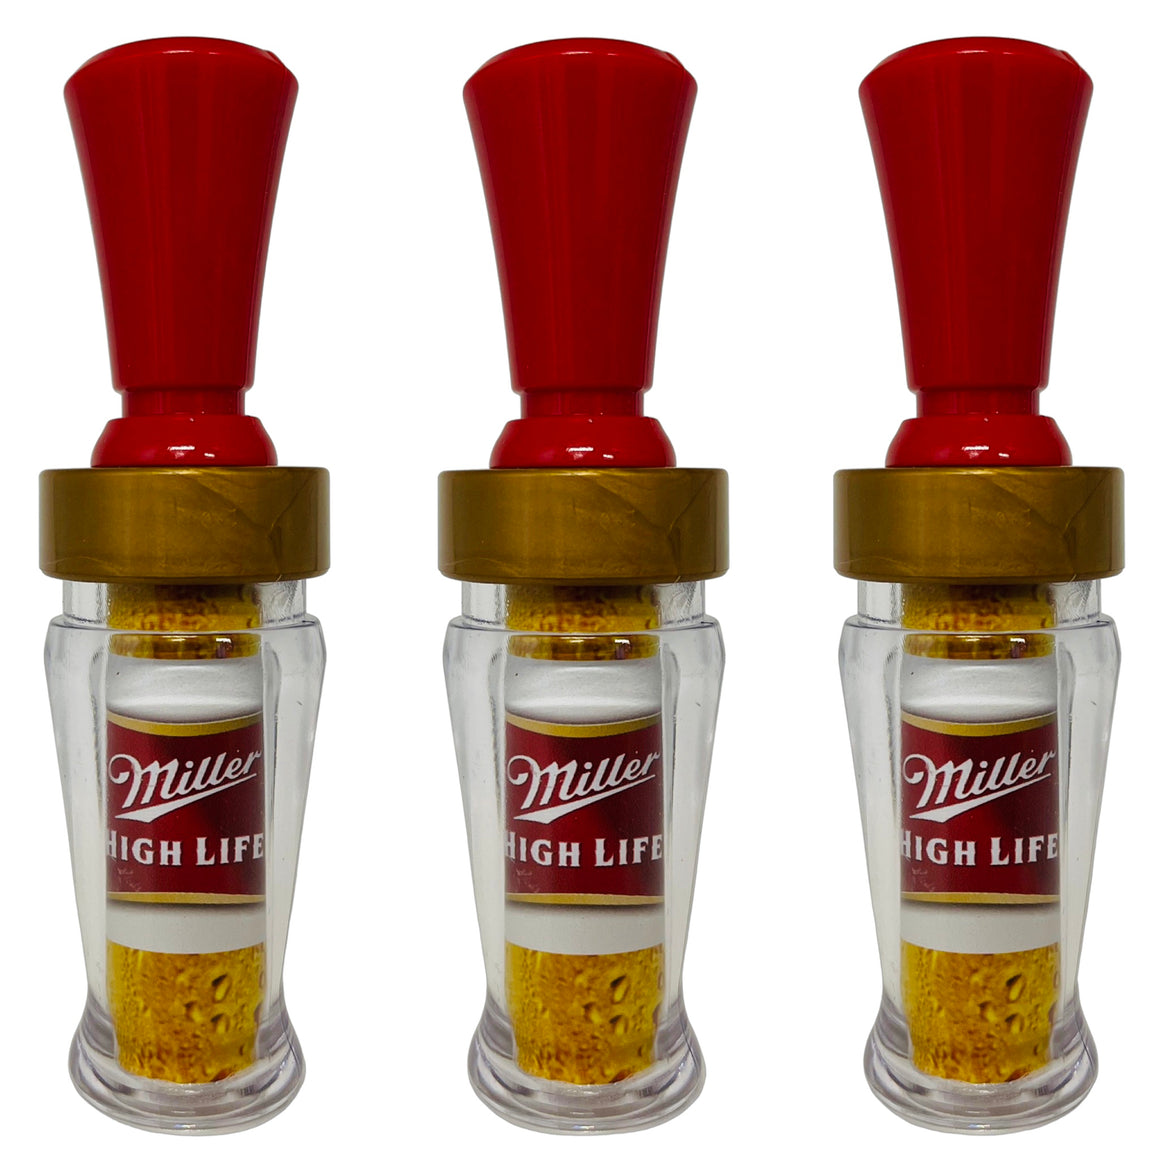 POLYCARBONATE IMAGE DUCK CALL HIGH LIFE